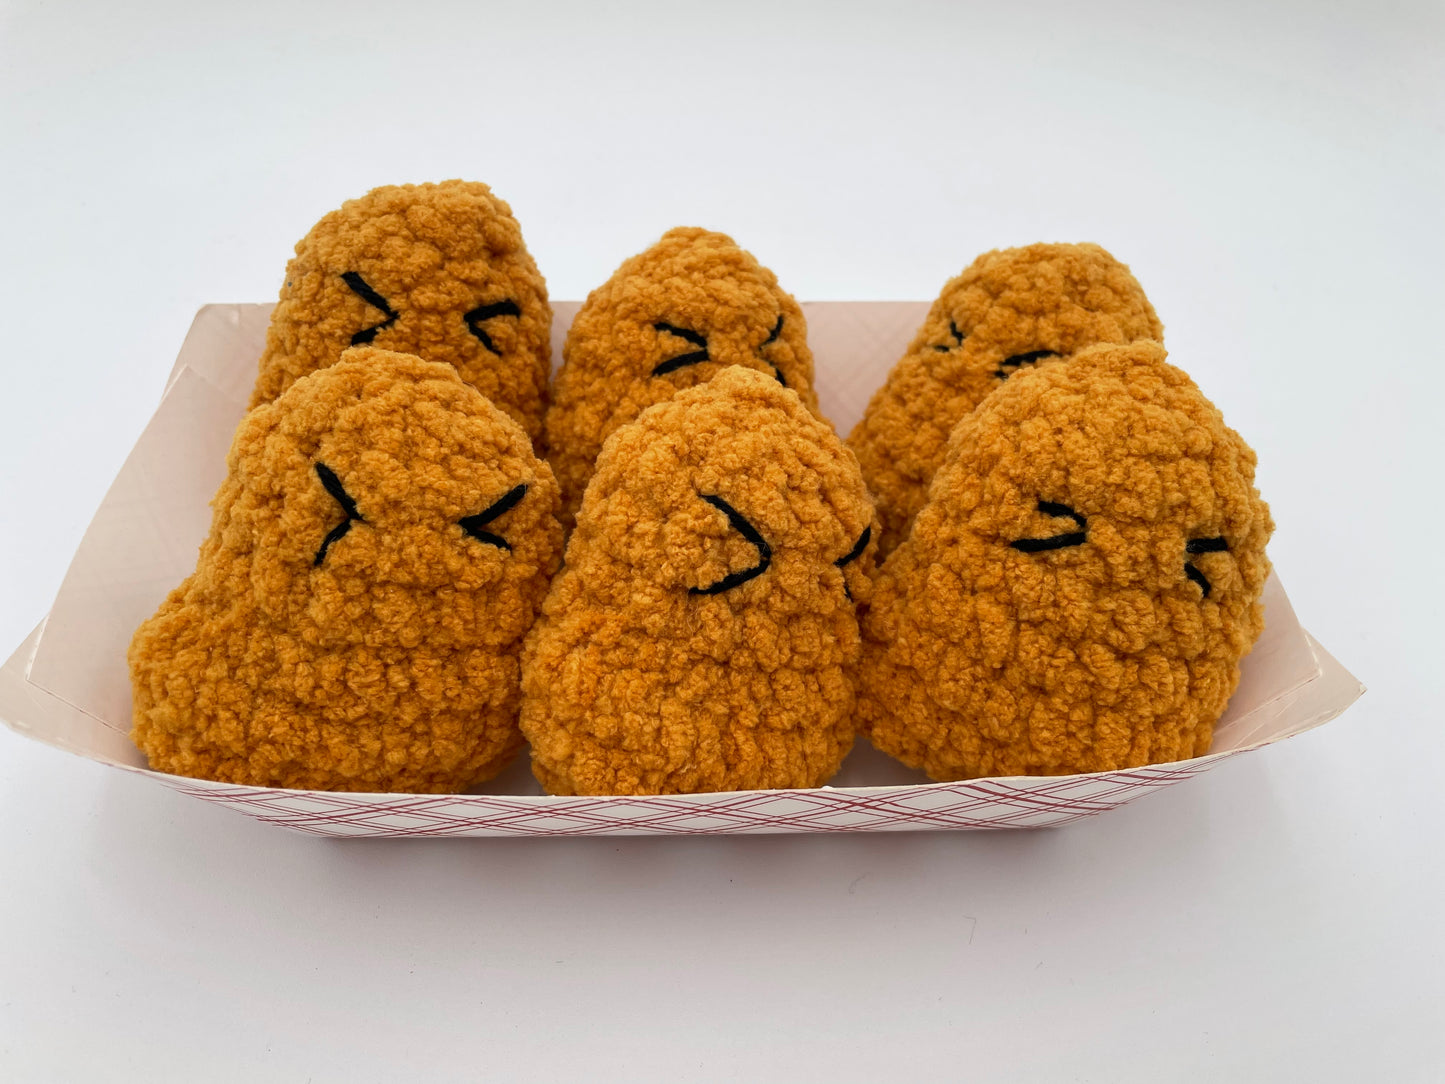 Munchies - Chicken Nugget w/ Faces - 6 pack